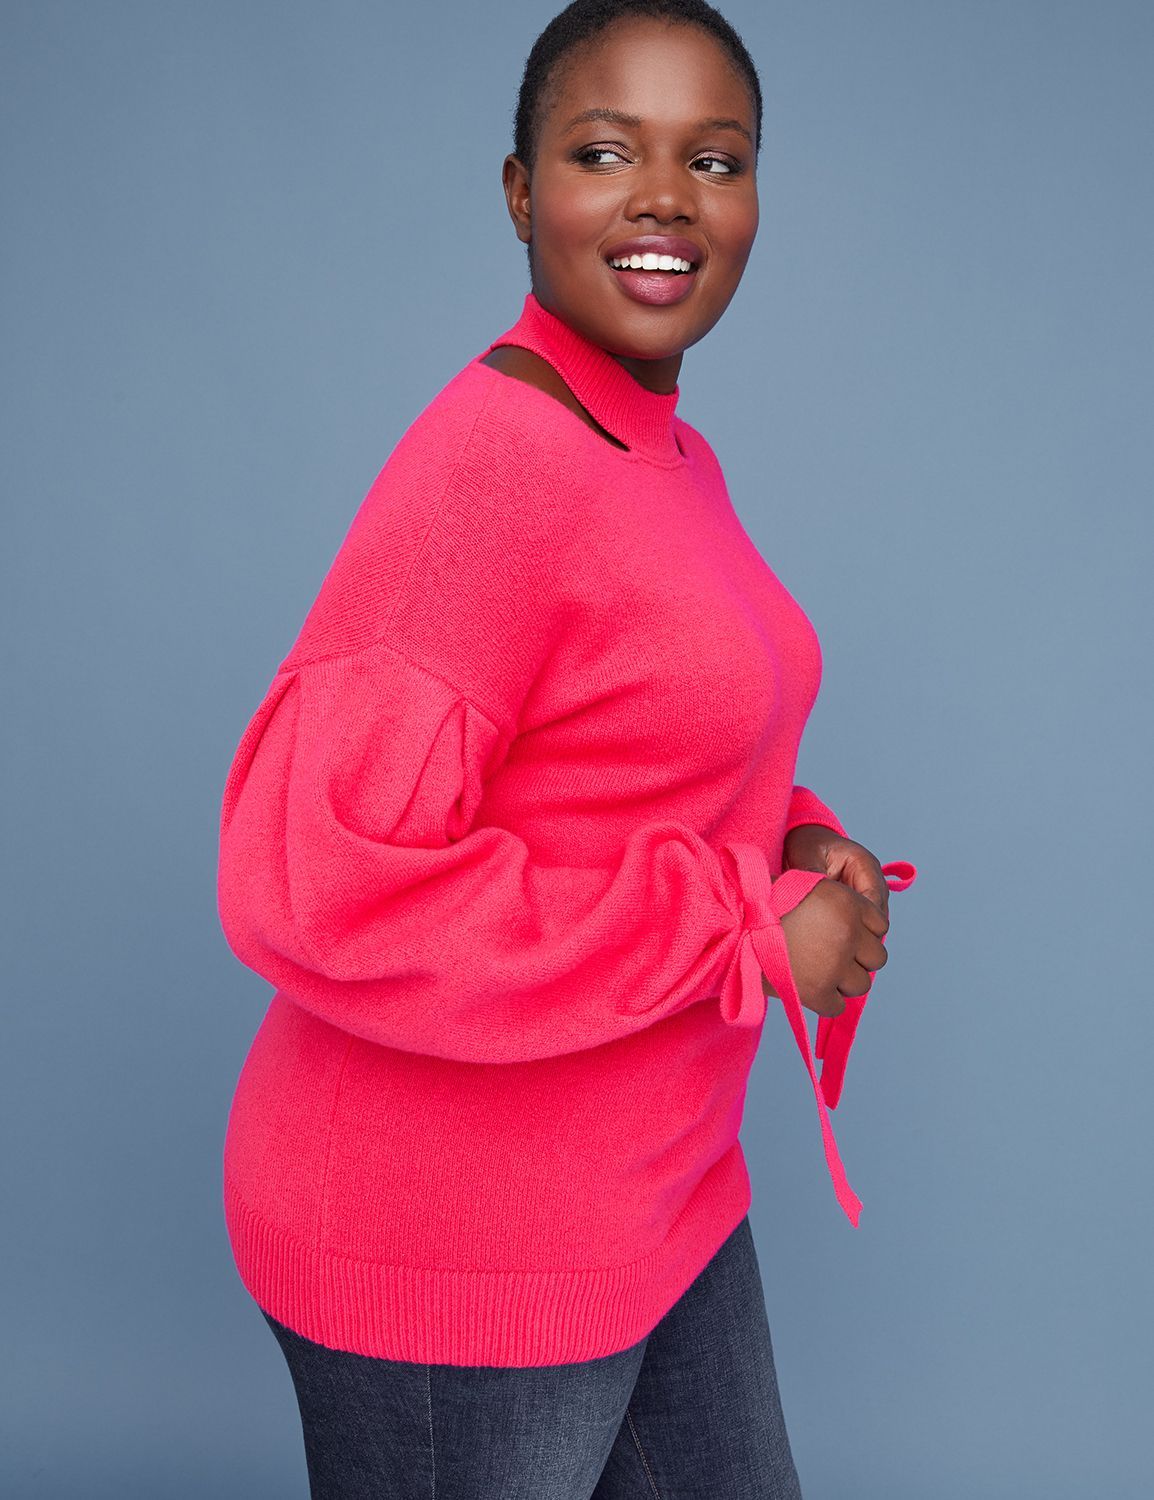 Lane Bryant Plus Size Cold Weather Fashion Finds- Cutout Mock-Neck Sweater With Tie Cuffs